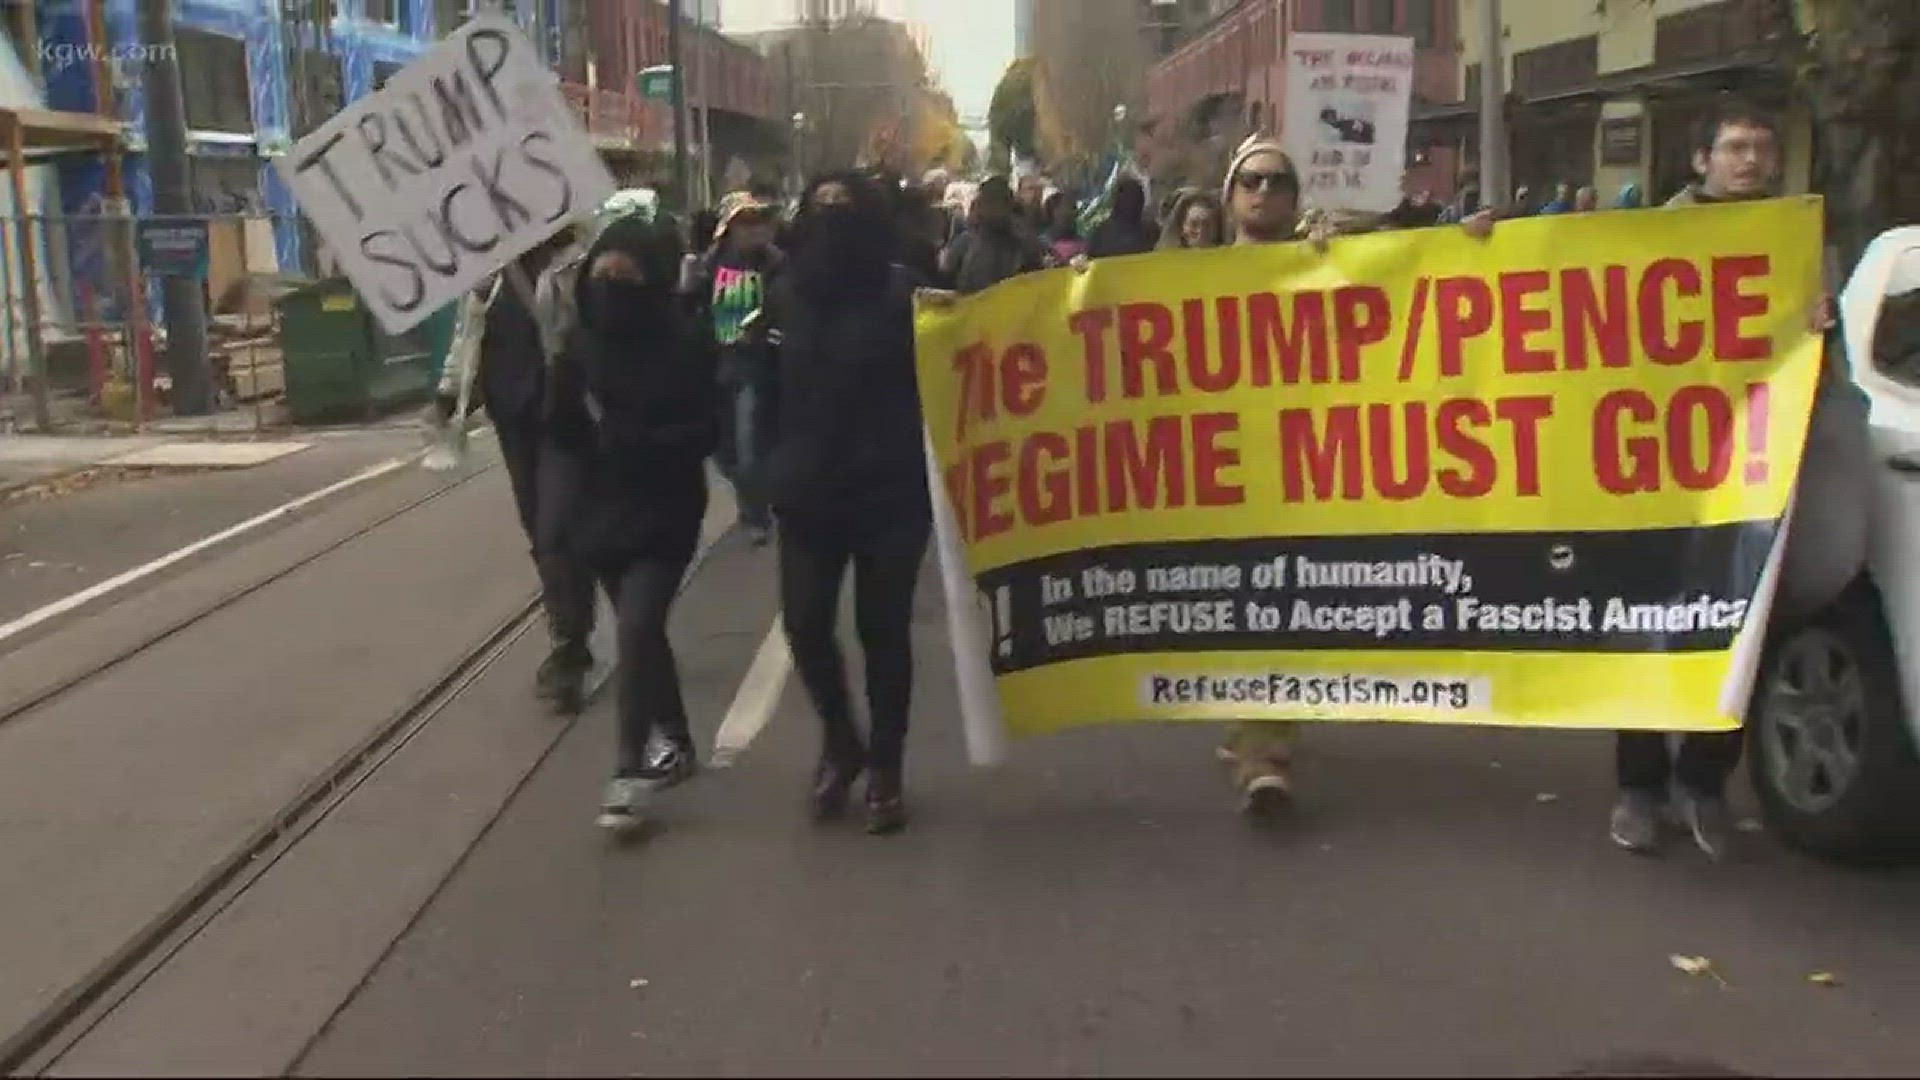 Anti-fascism demonstrators march in Portland as part of nationwide Nov. 4 protest